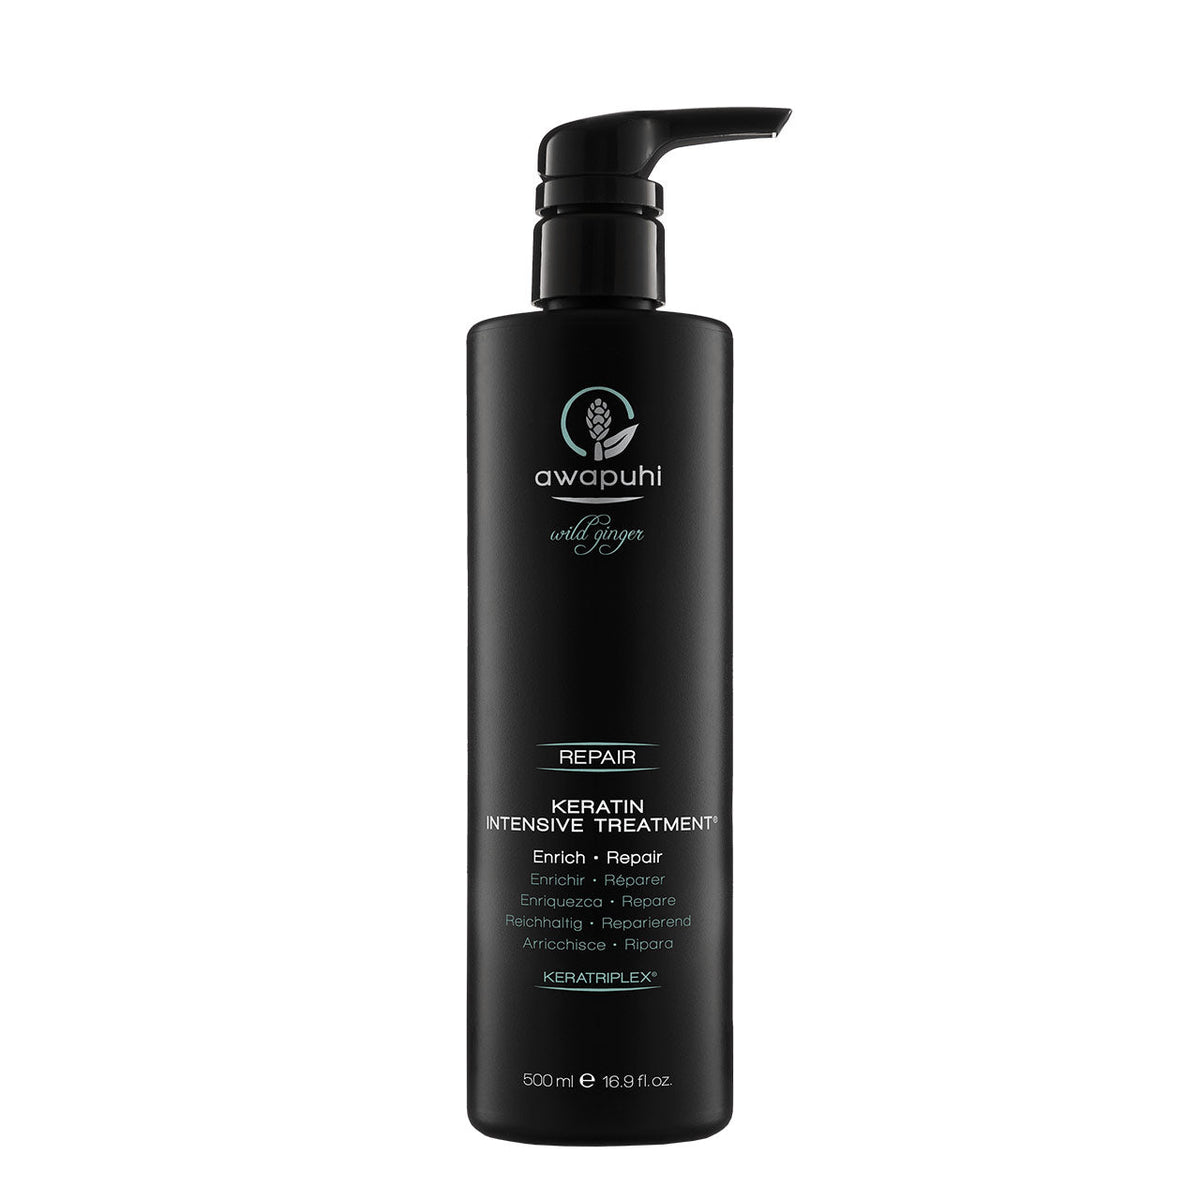 Awapuhi Wild Ginger Repair Keratin Intensive Treatment - 500ML - by Paul Mitchell |ProCare Outlet|